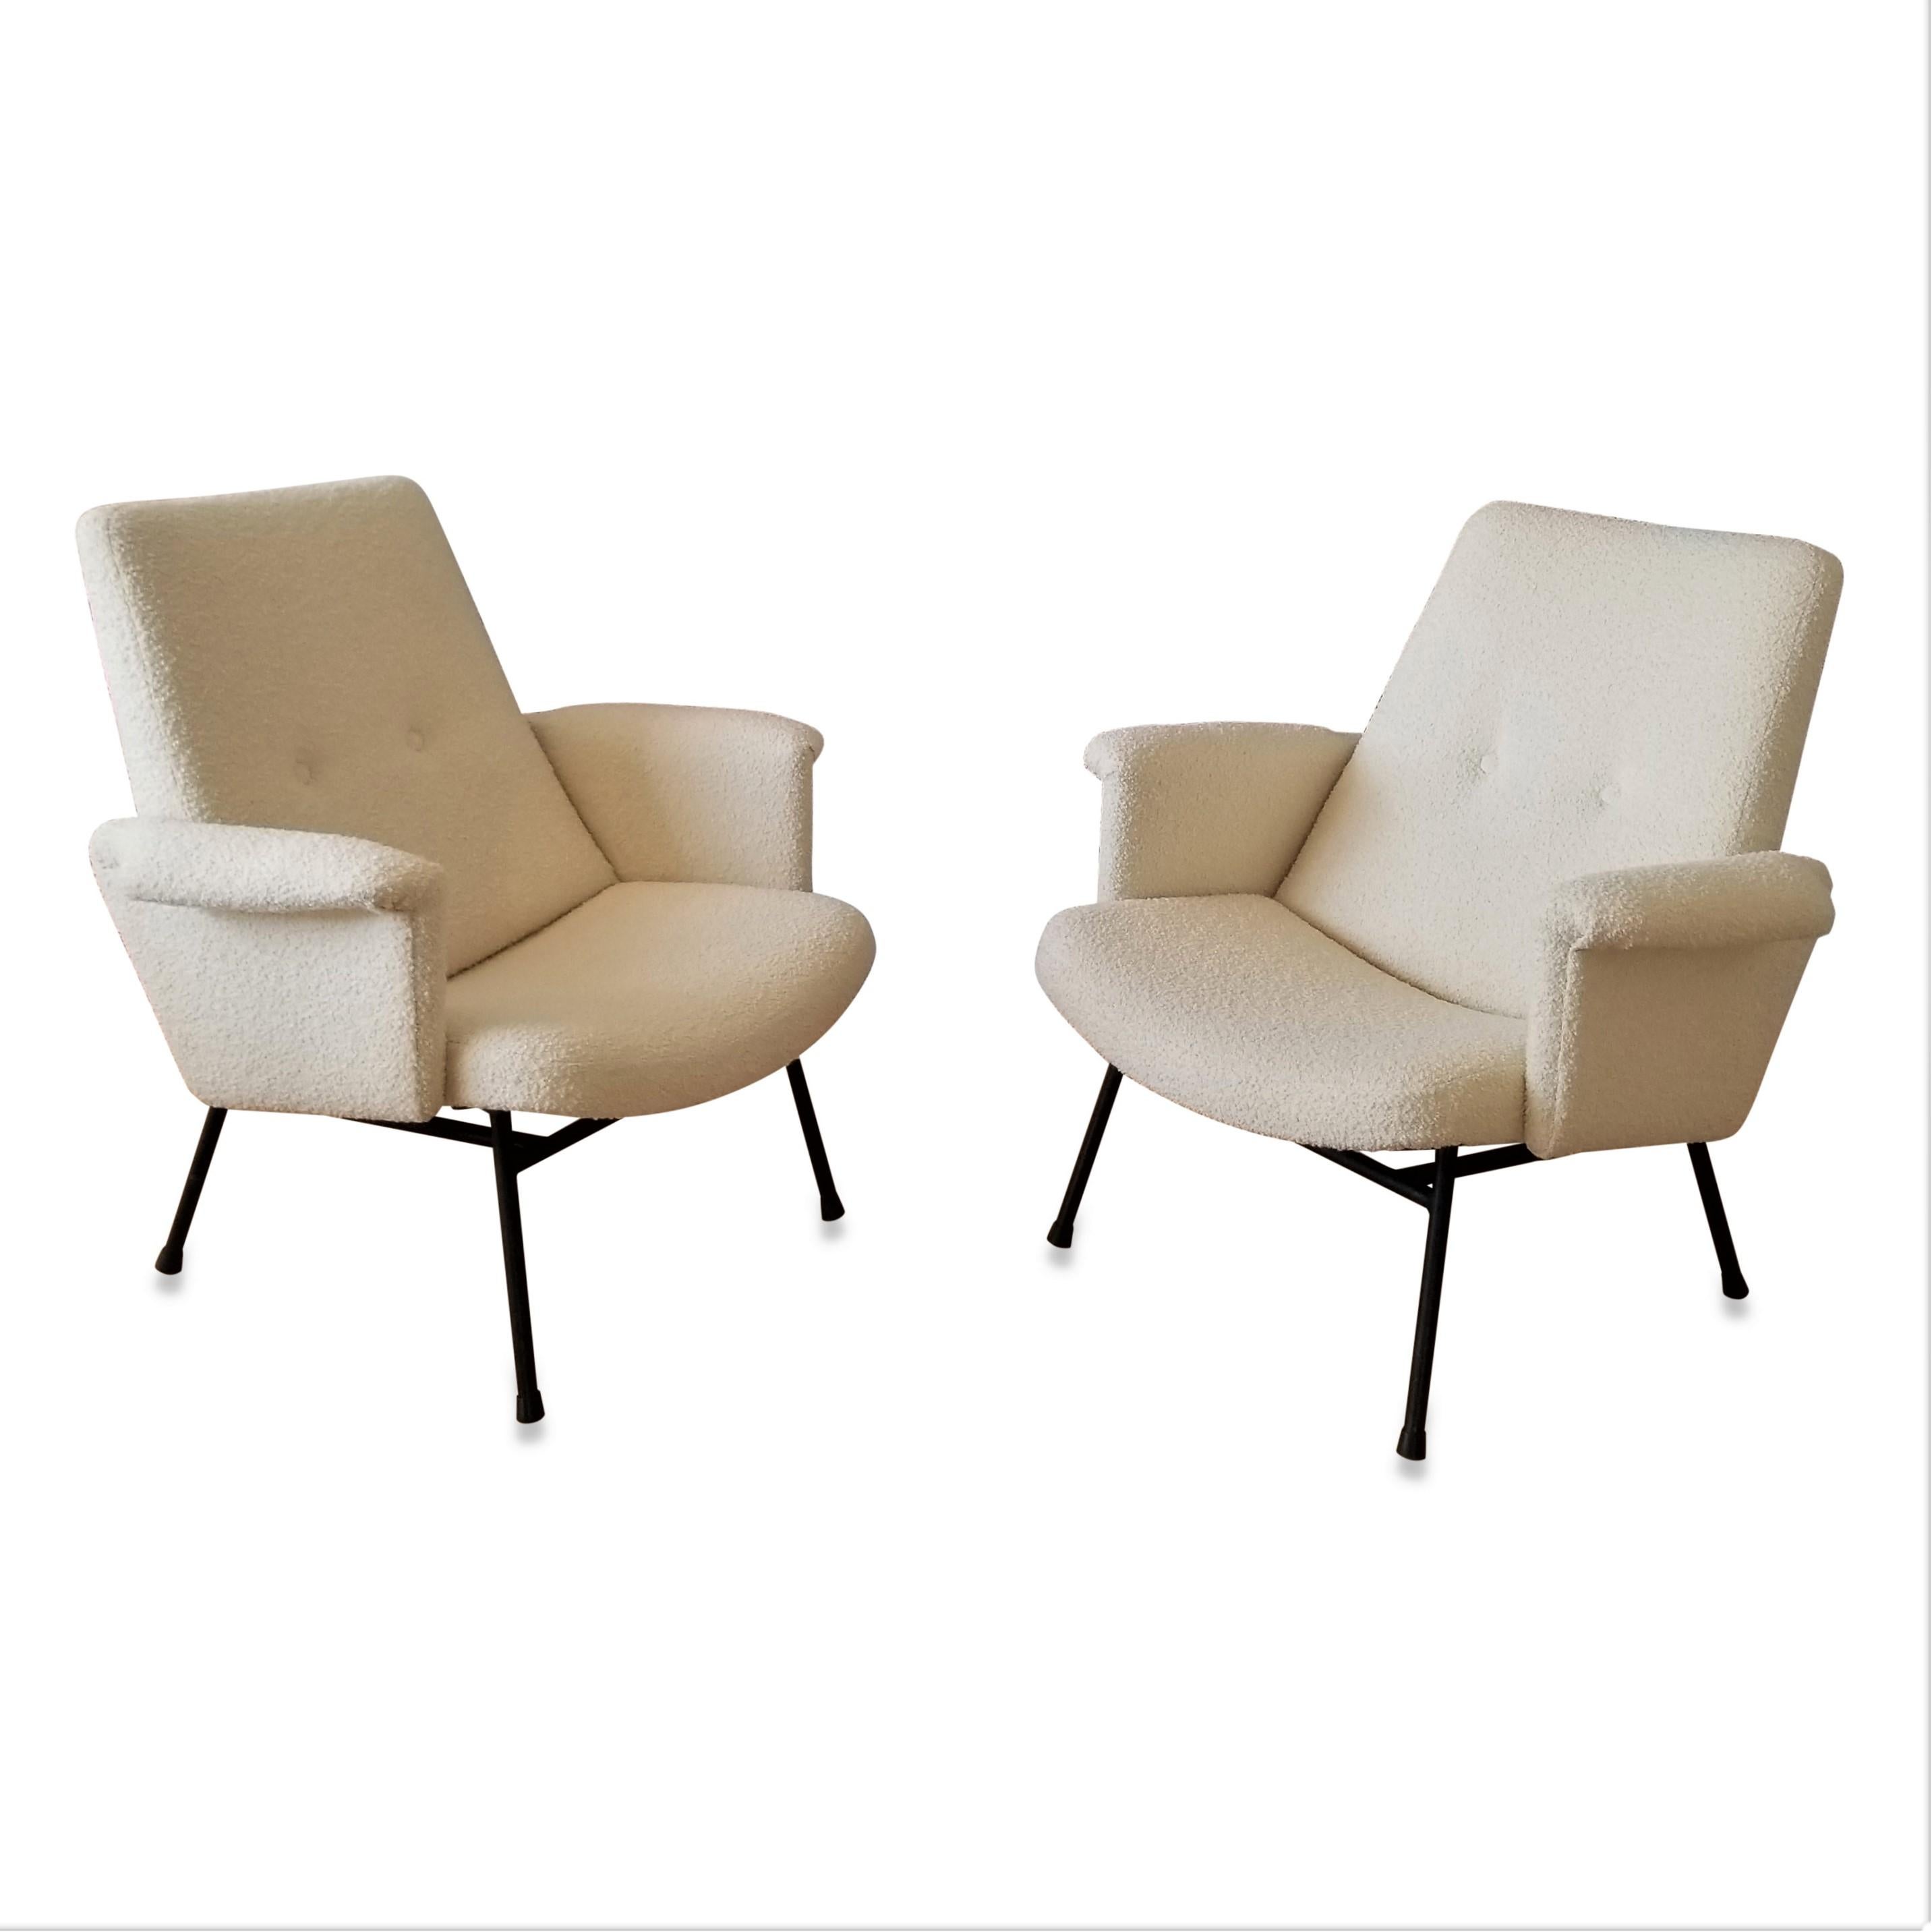 Editions Steiner
Black lacquered feet
Freshly reupholstered in crème white bouclette by Bisson Bruneel
These armchairs will ship from France and can be returned to either France or New York location
Feet and chairs will be disassembled for